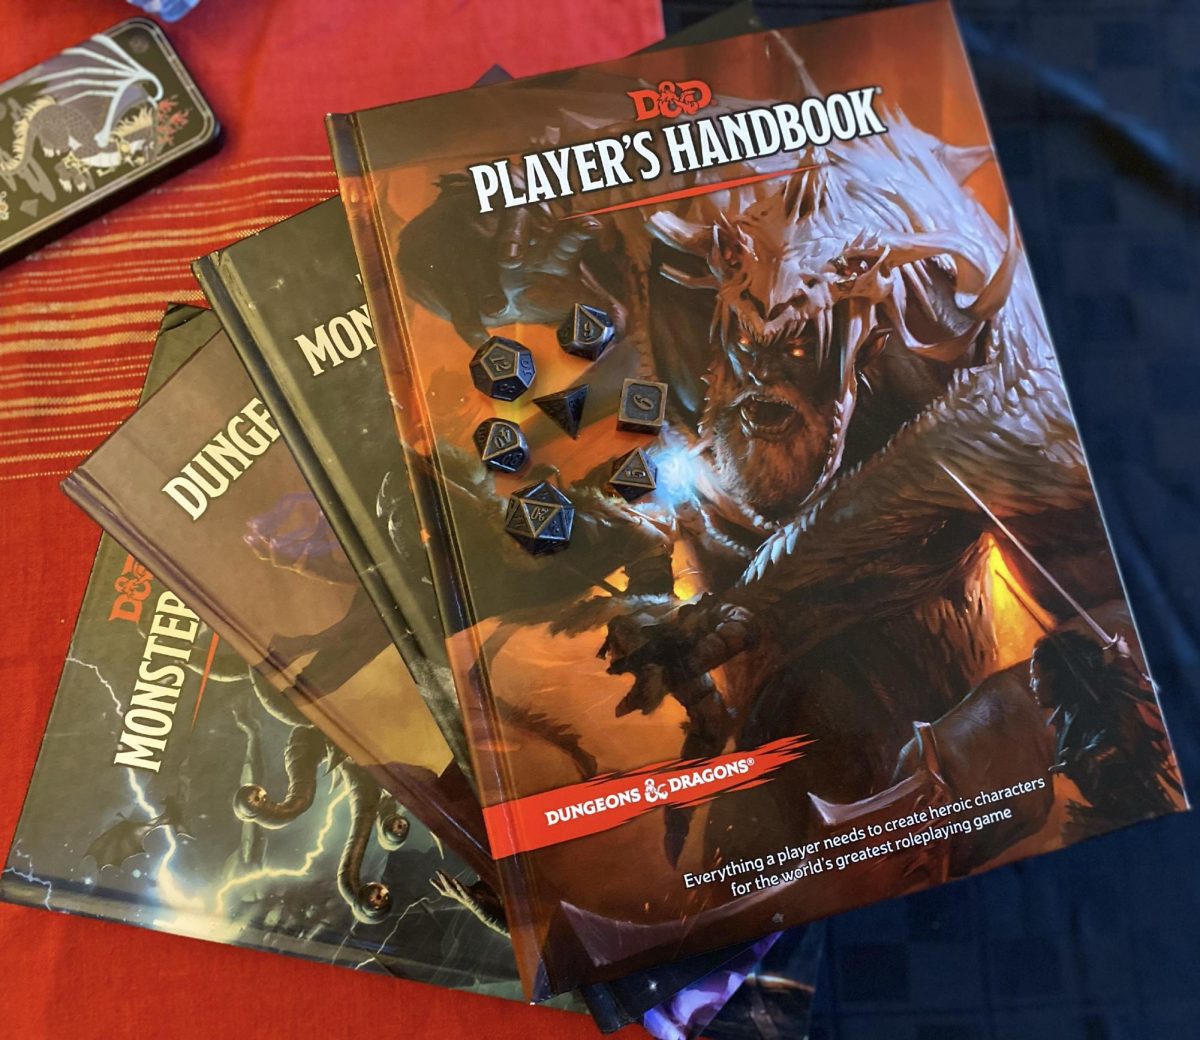 Dungeons+and+Dragons+is+a+game+combining+story-telling+and+mechanics.+Several+official+rule+books+have+been+published+by+the+company+Wizards+of+the+Coasts+that+now+owns+the+franchise.